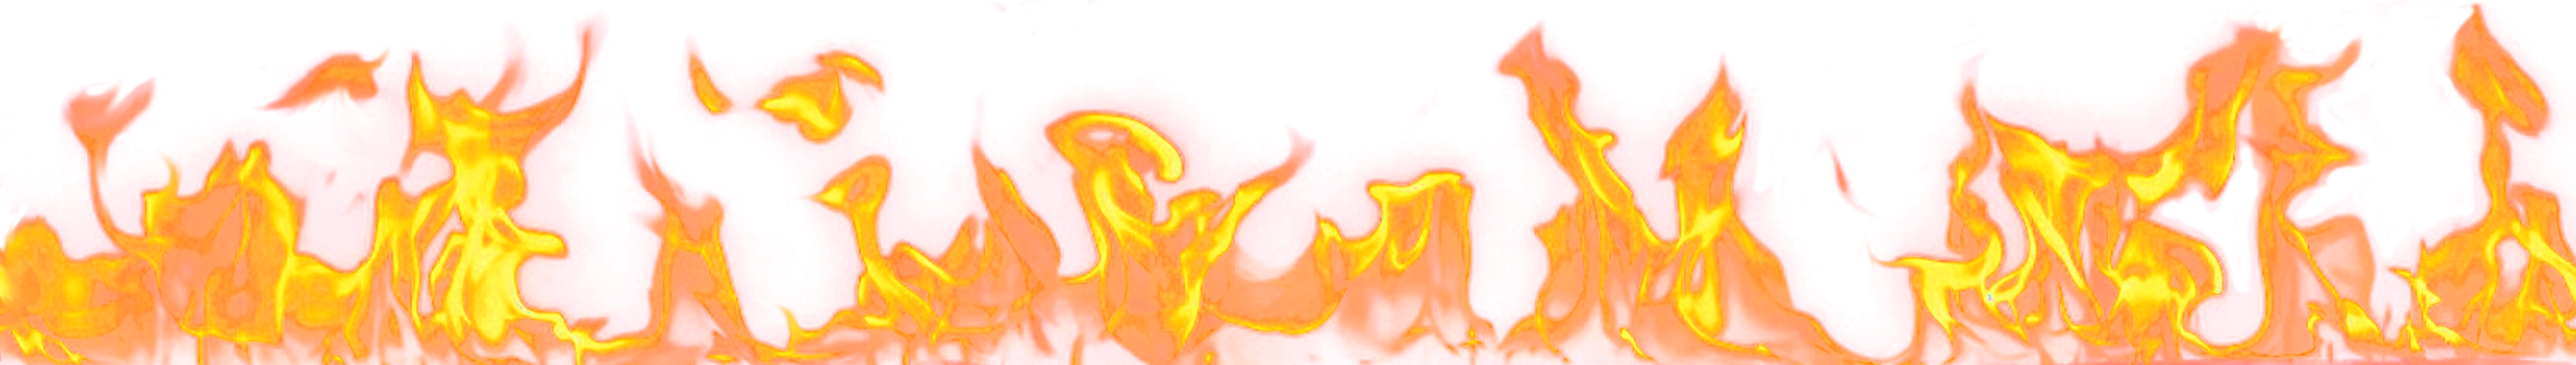 Fire Flames Background PNG Image